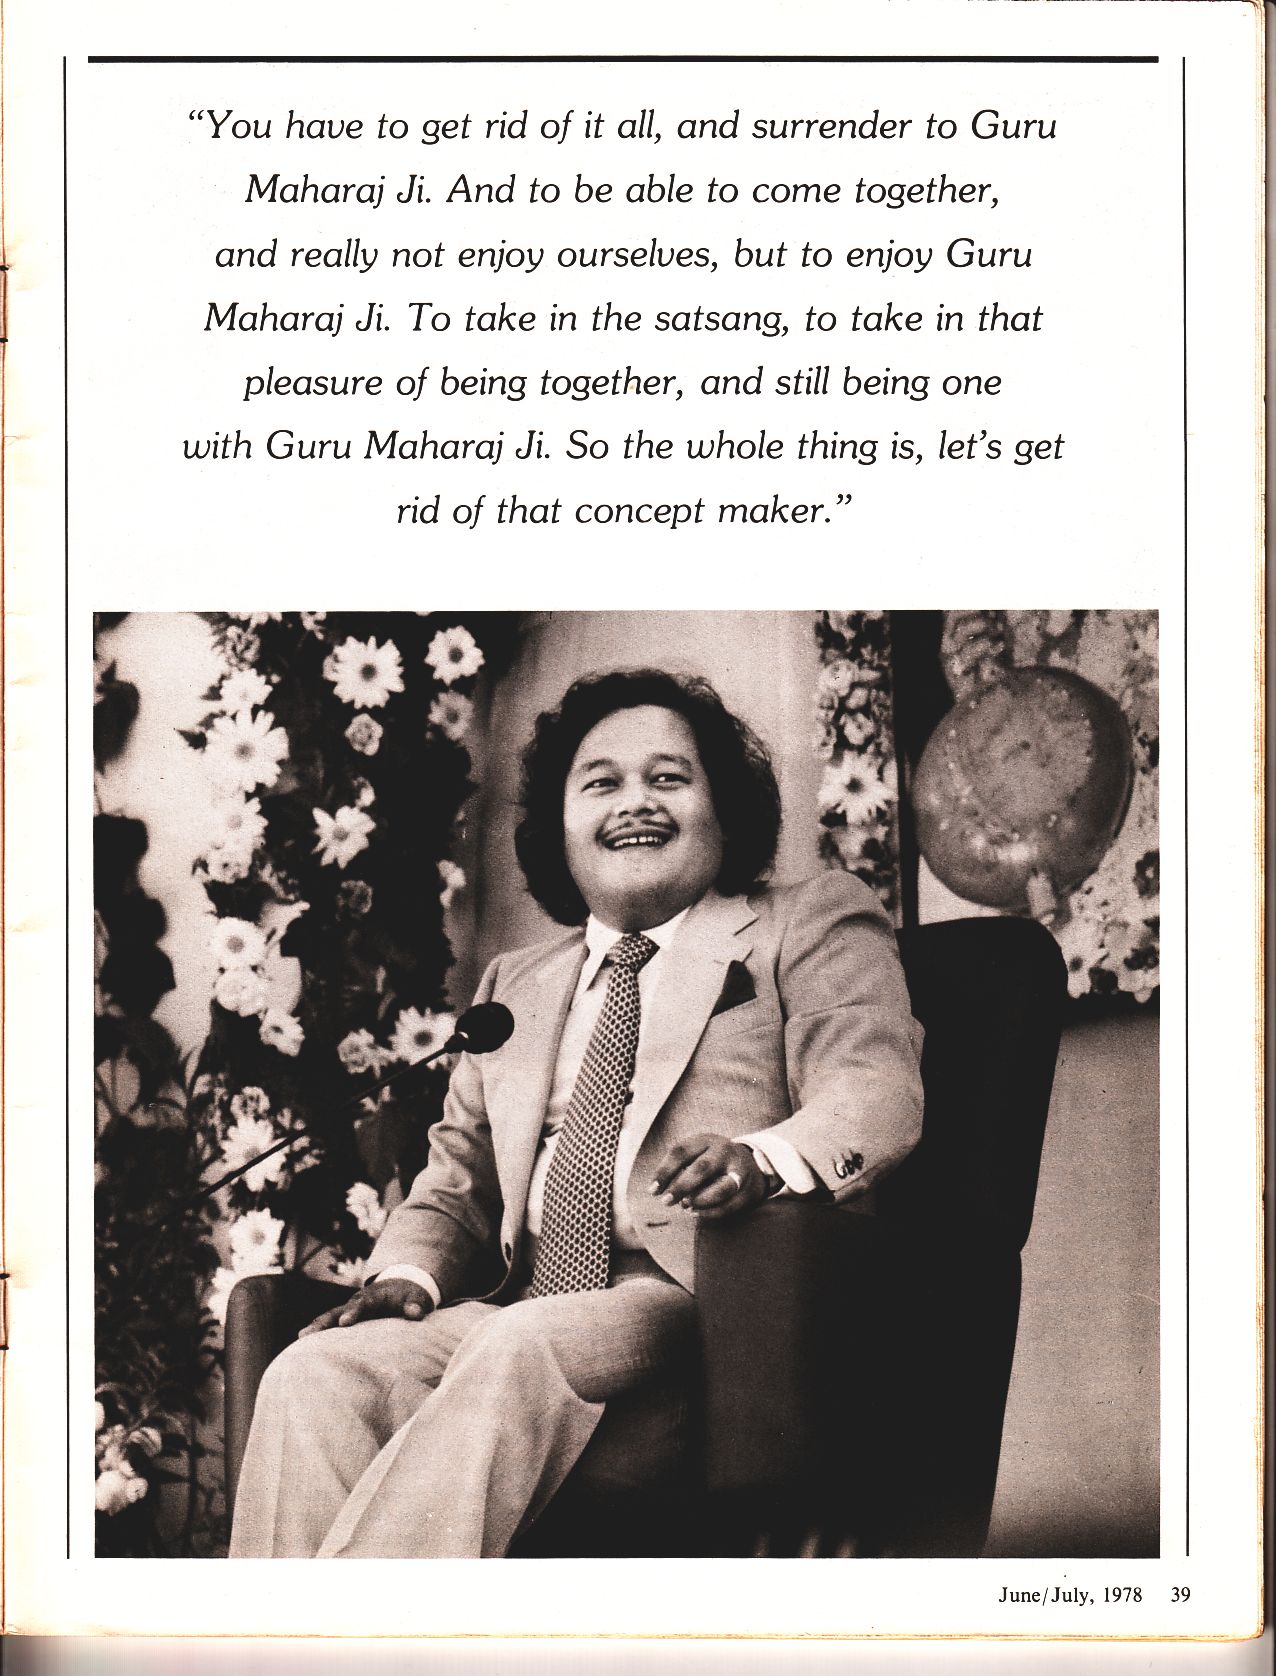 You have to get rid of it all, and surrender to Guru Maharaj Ji.